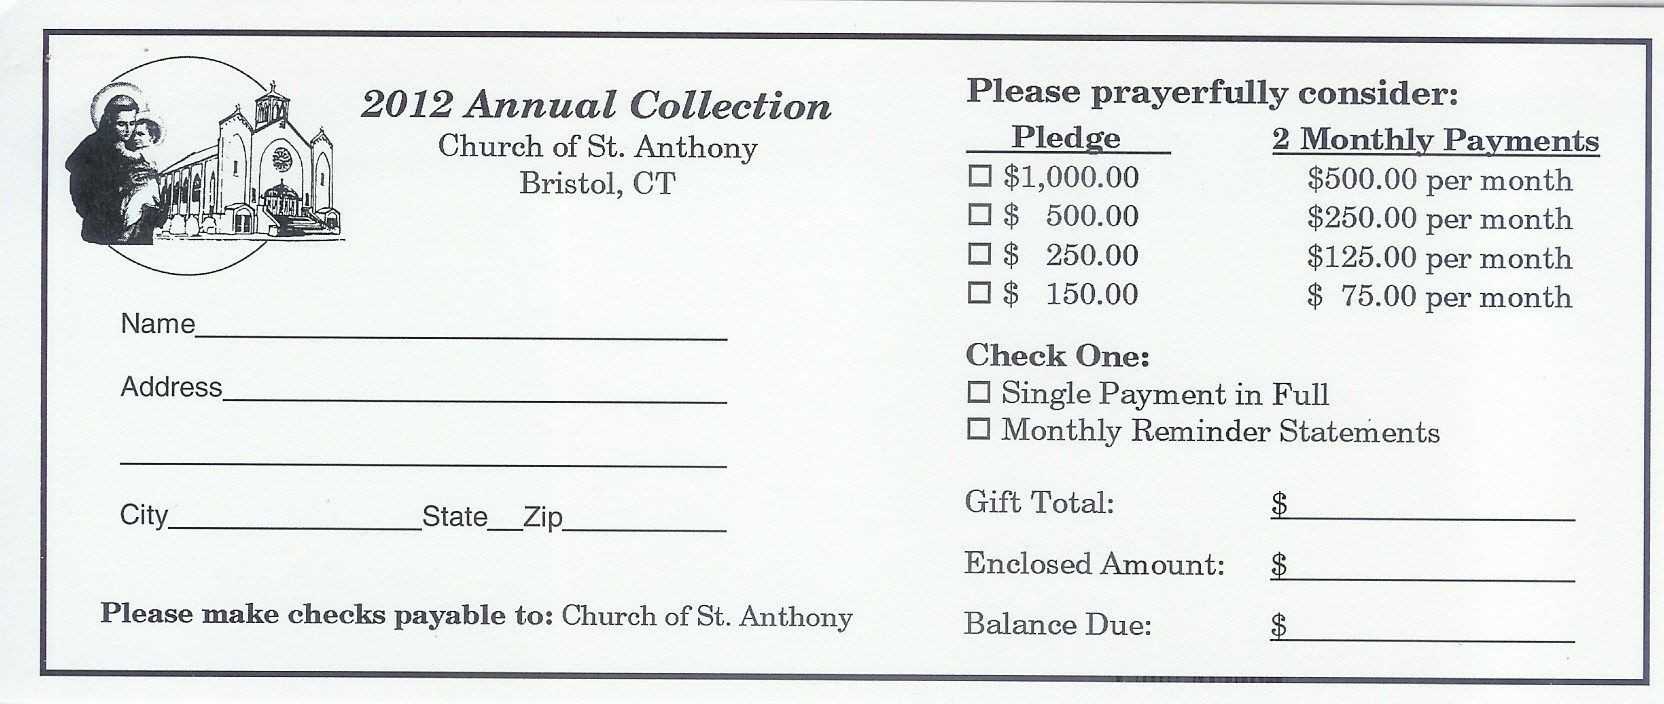 Pinandrew Martin On Pledge Cards | Fundraising Throughout Church Pledge Card Template